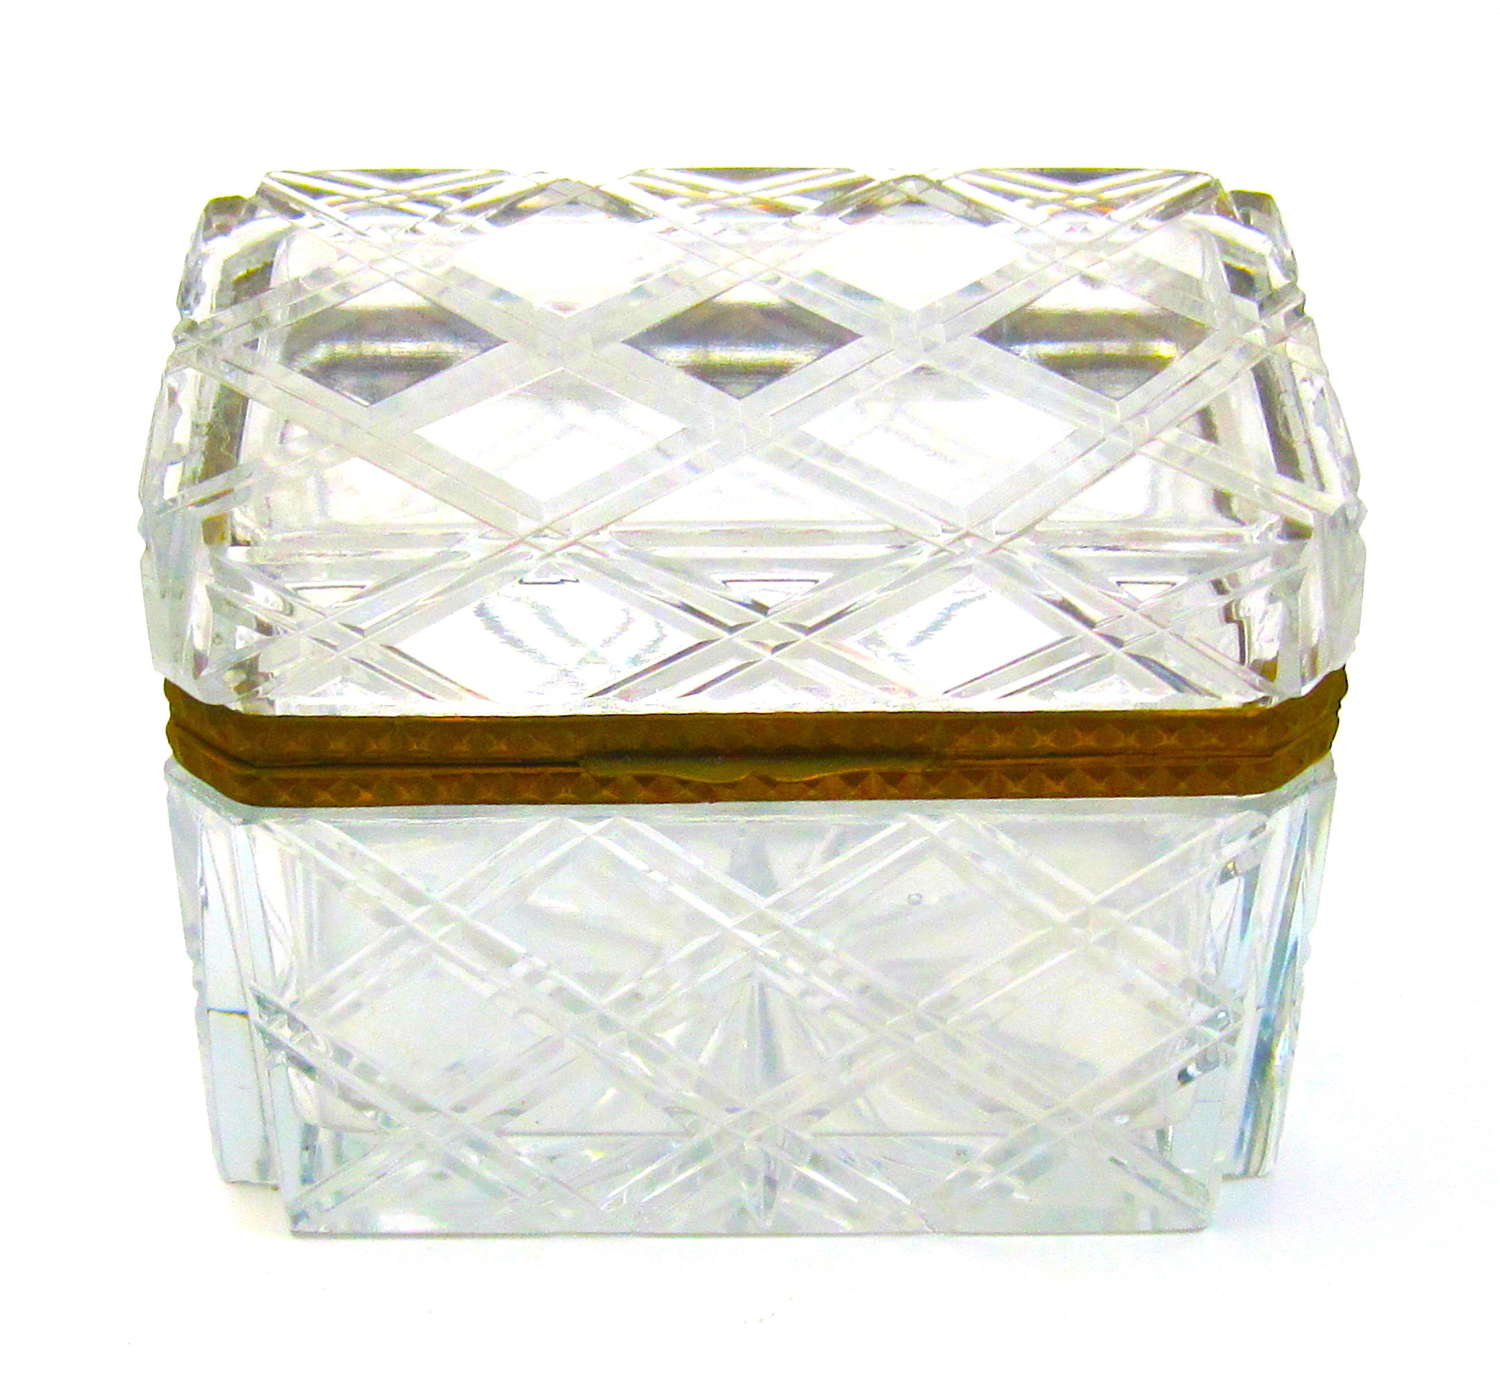 Antique French BACCARAT Cut Crystal Casket with Diamond Pattern